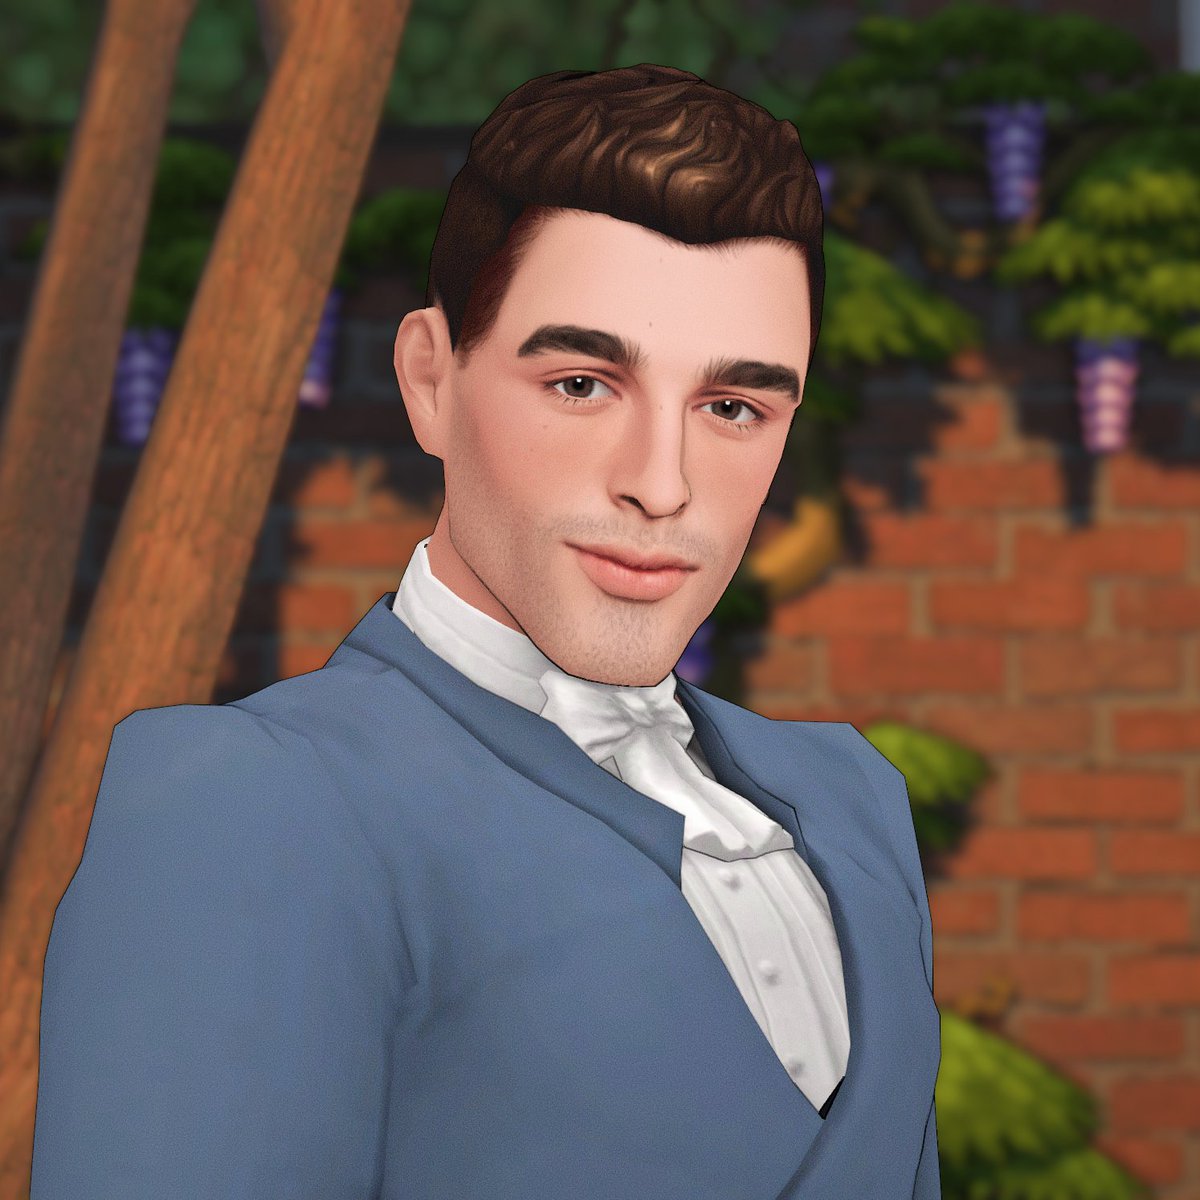 Just George.
Farmer George.

#TheSims4 #TS4 #ShowUsYourSims